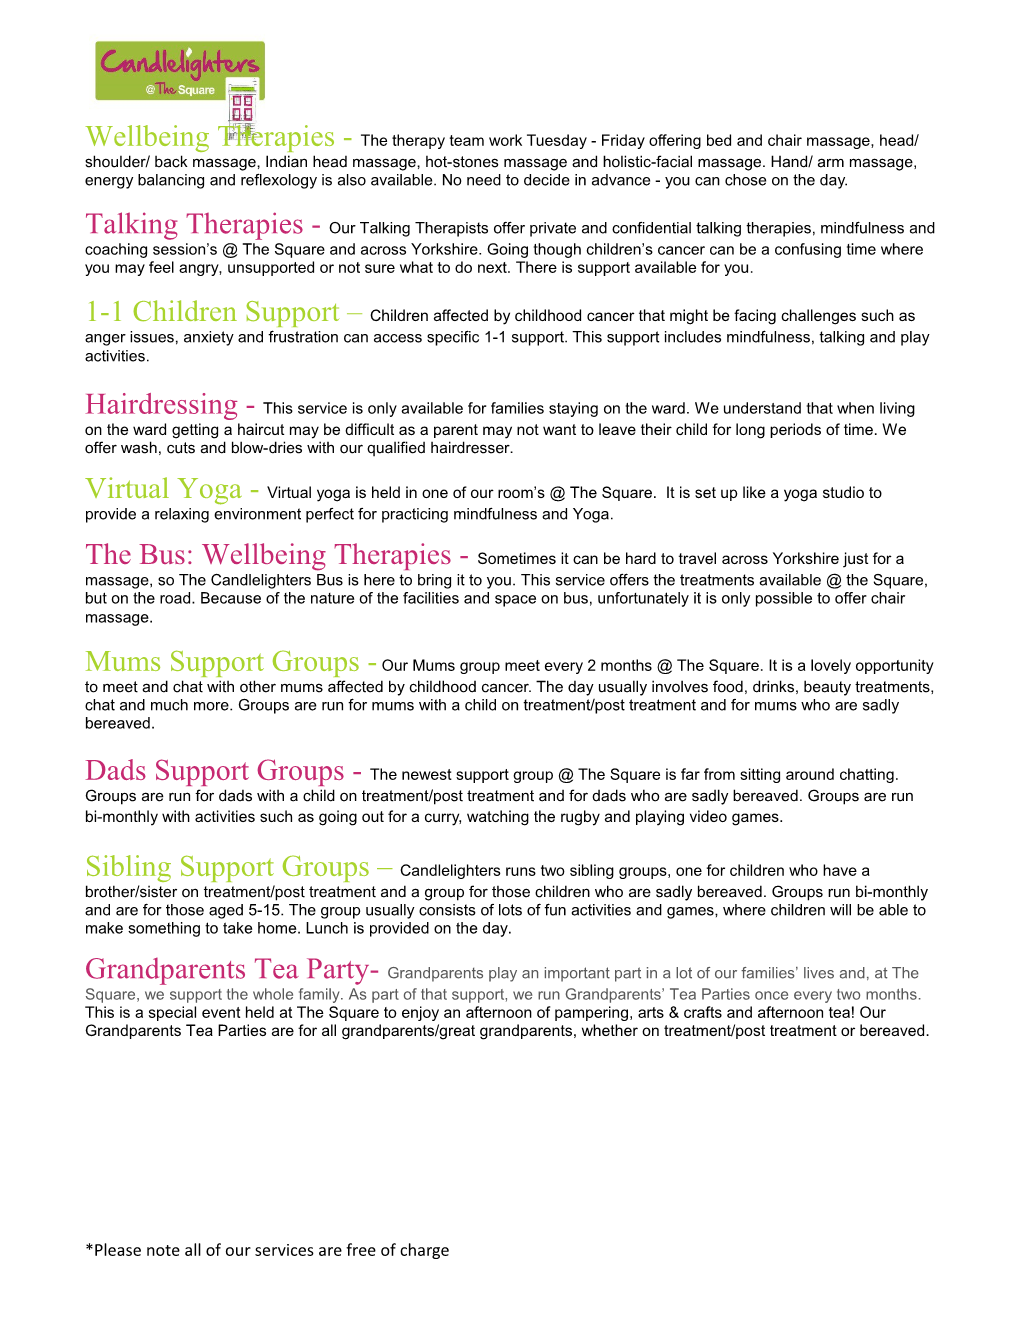 Wellbeing Therapies -The Therapy Team Work Tuesday - Friday Offering Bed and Chair Massage